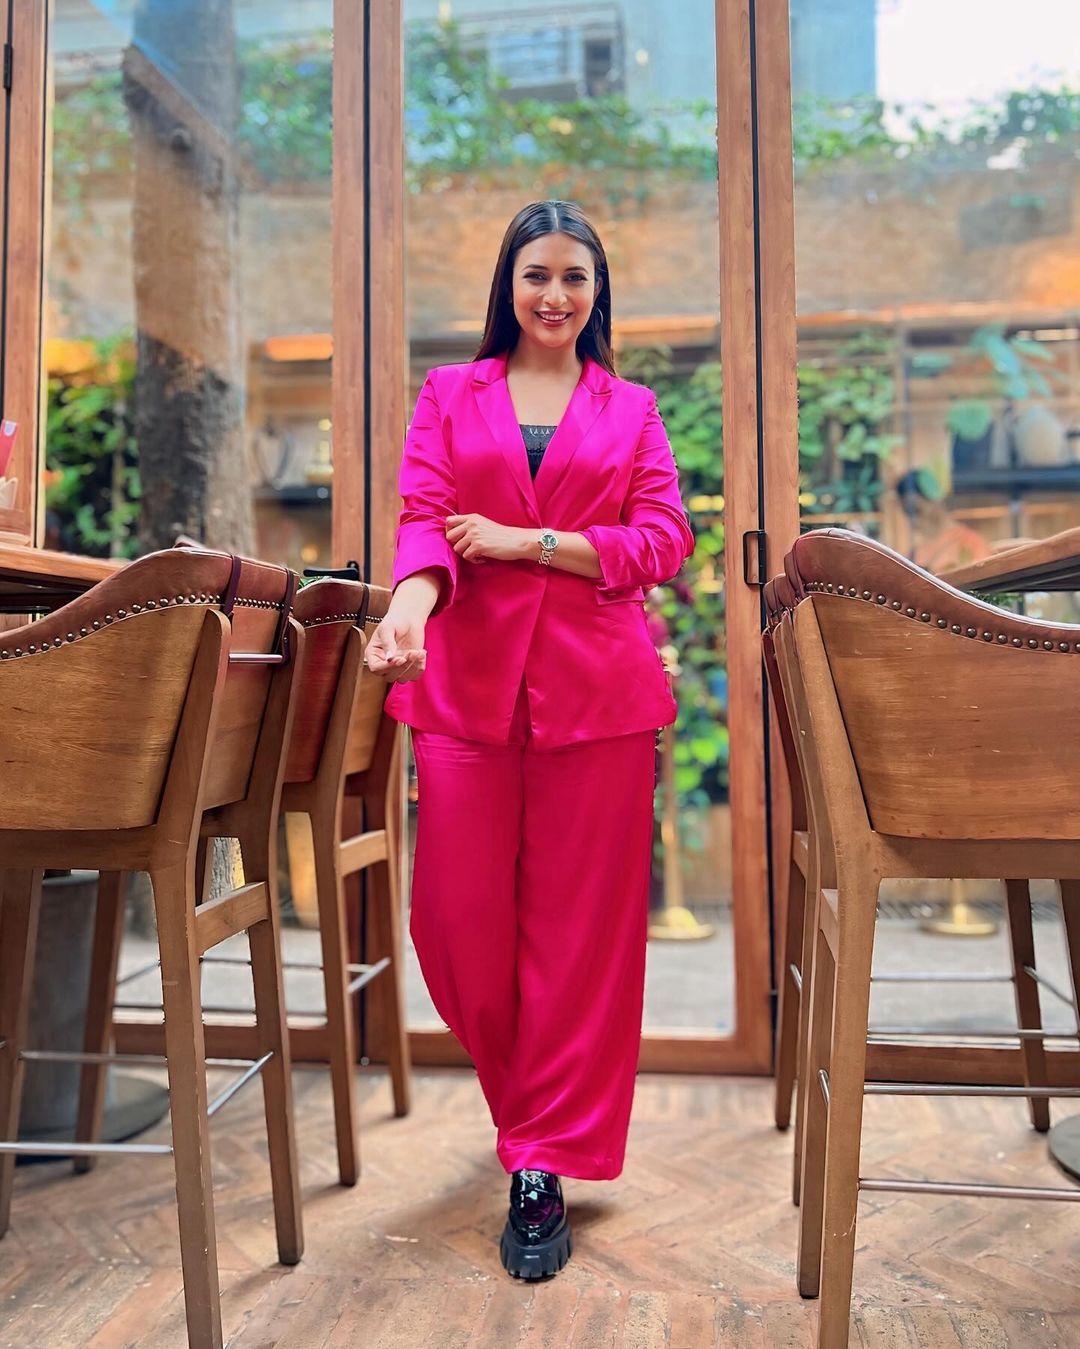 To add to the boss lady vibe of her outfit, Divyanka paired her pink formals with black shoes